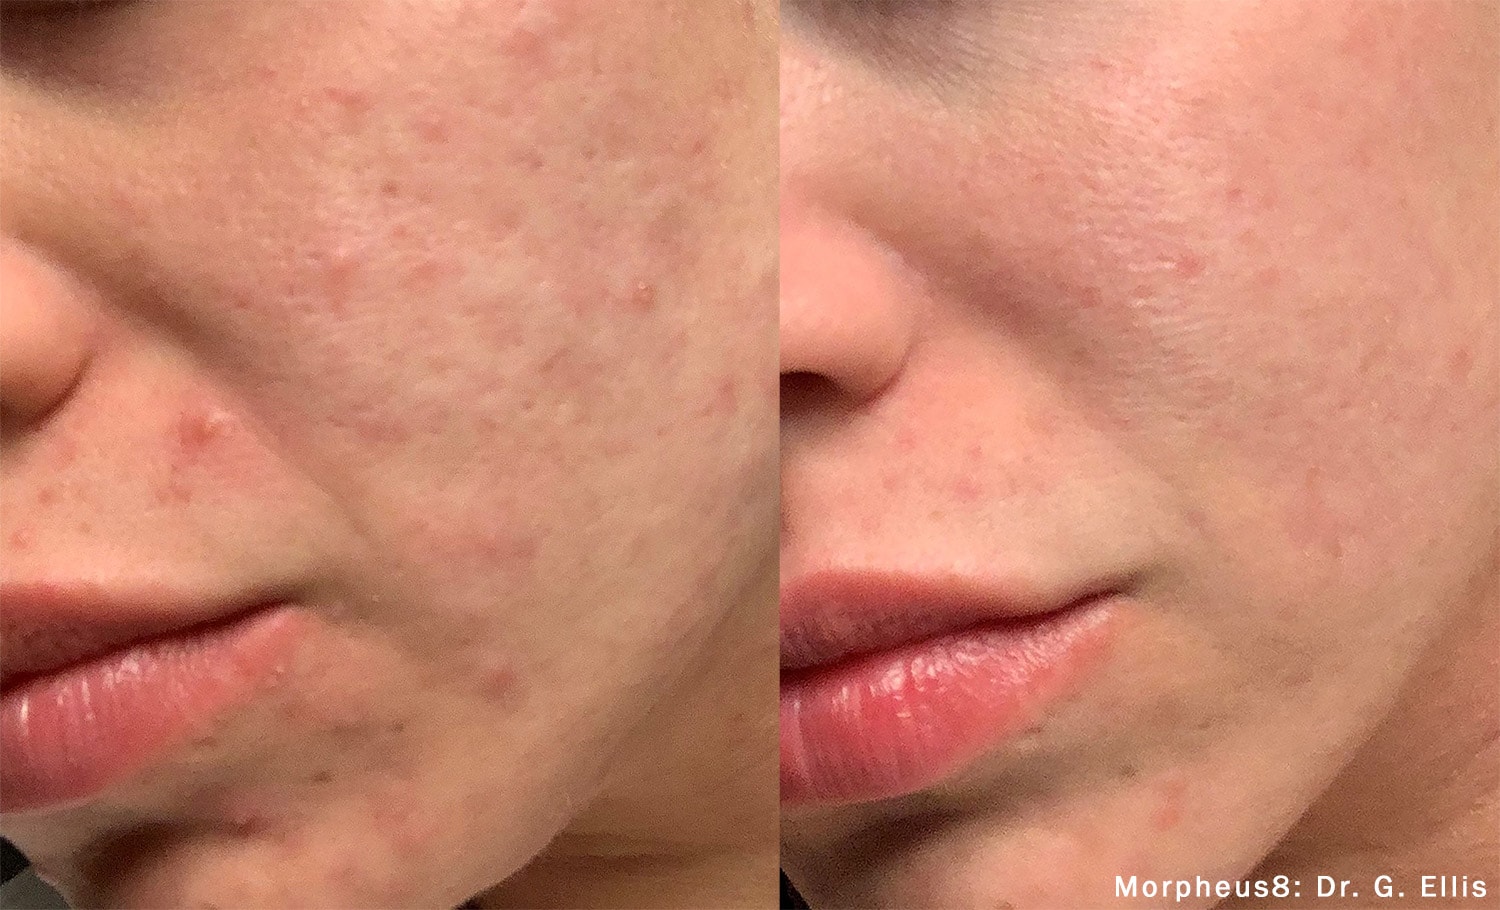 Before and After photos of Morpheus8 treatments reducing an acne outbreak on a woman’s cheek